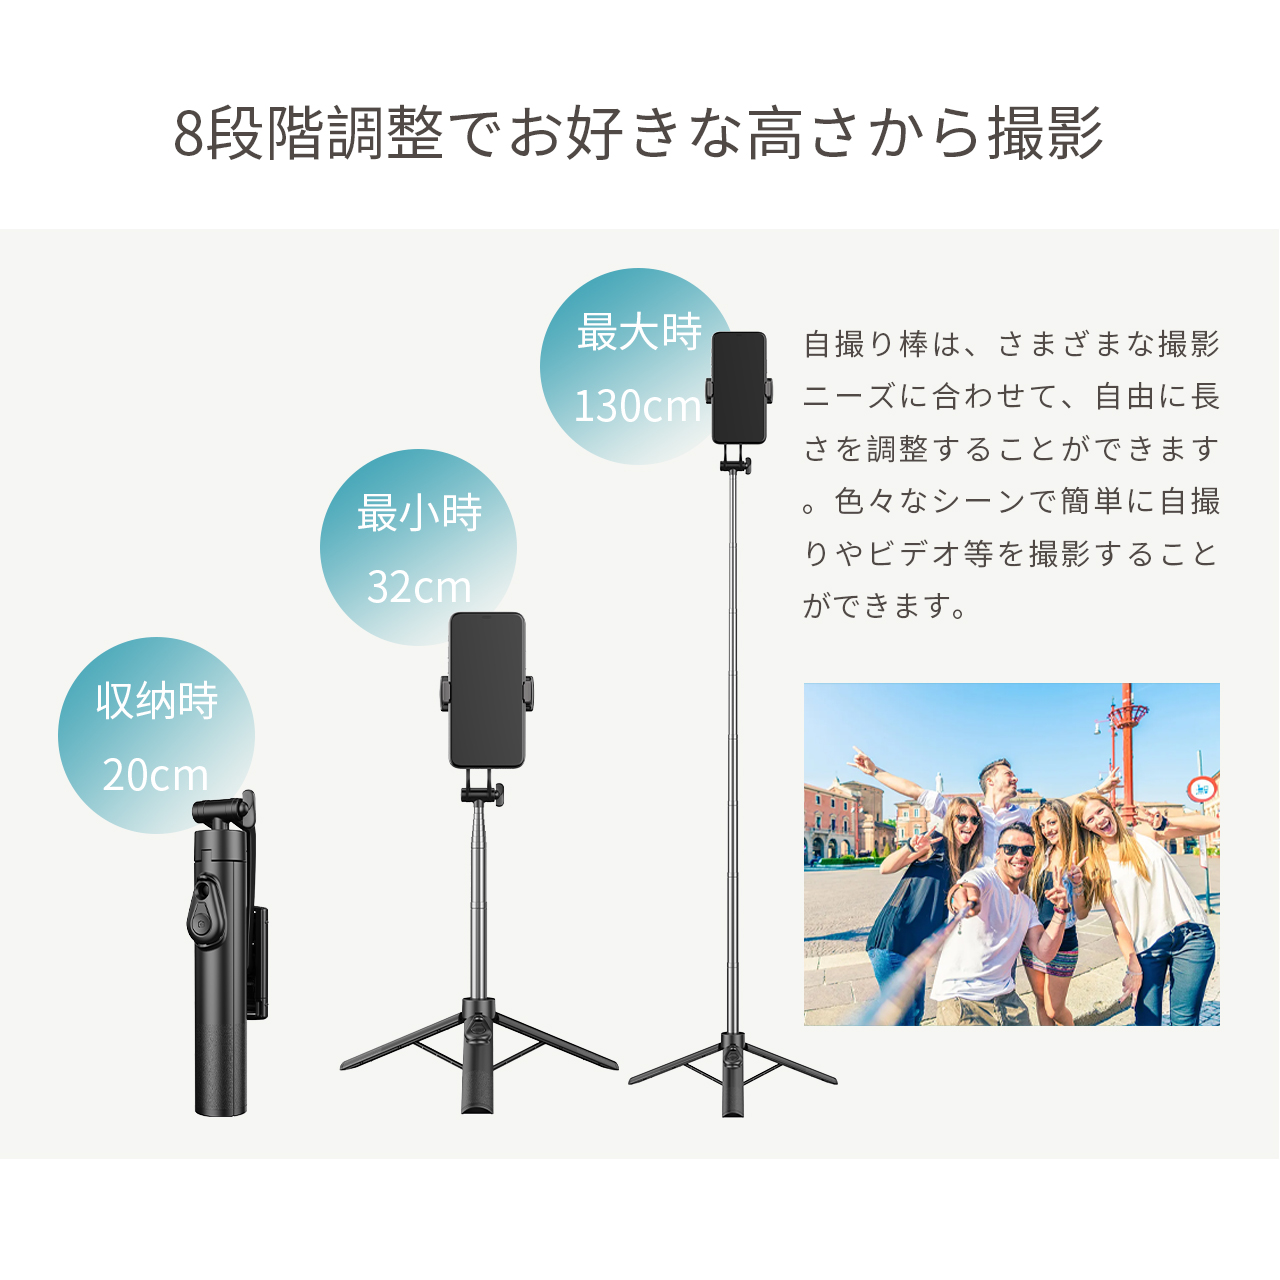  tripod smartphone for self .. smartphone for tripod remote control smartphone tripod compact light weight self .. stick travel iphone Android smartphone stand length 130cm